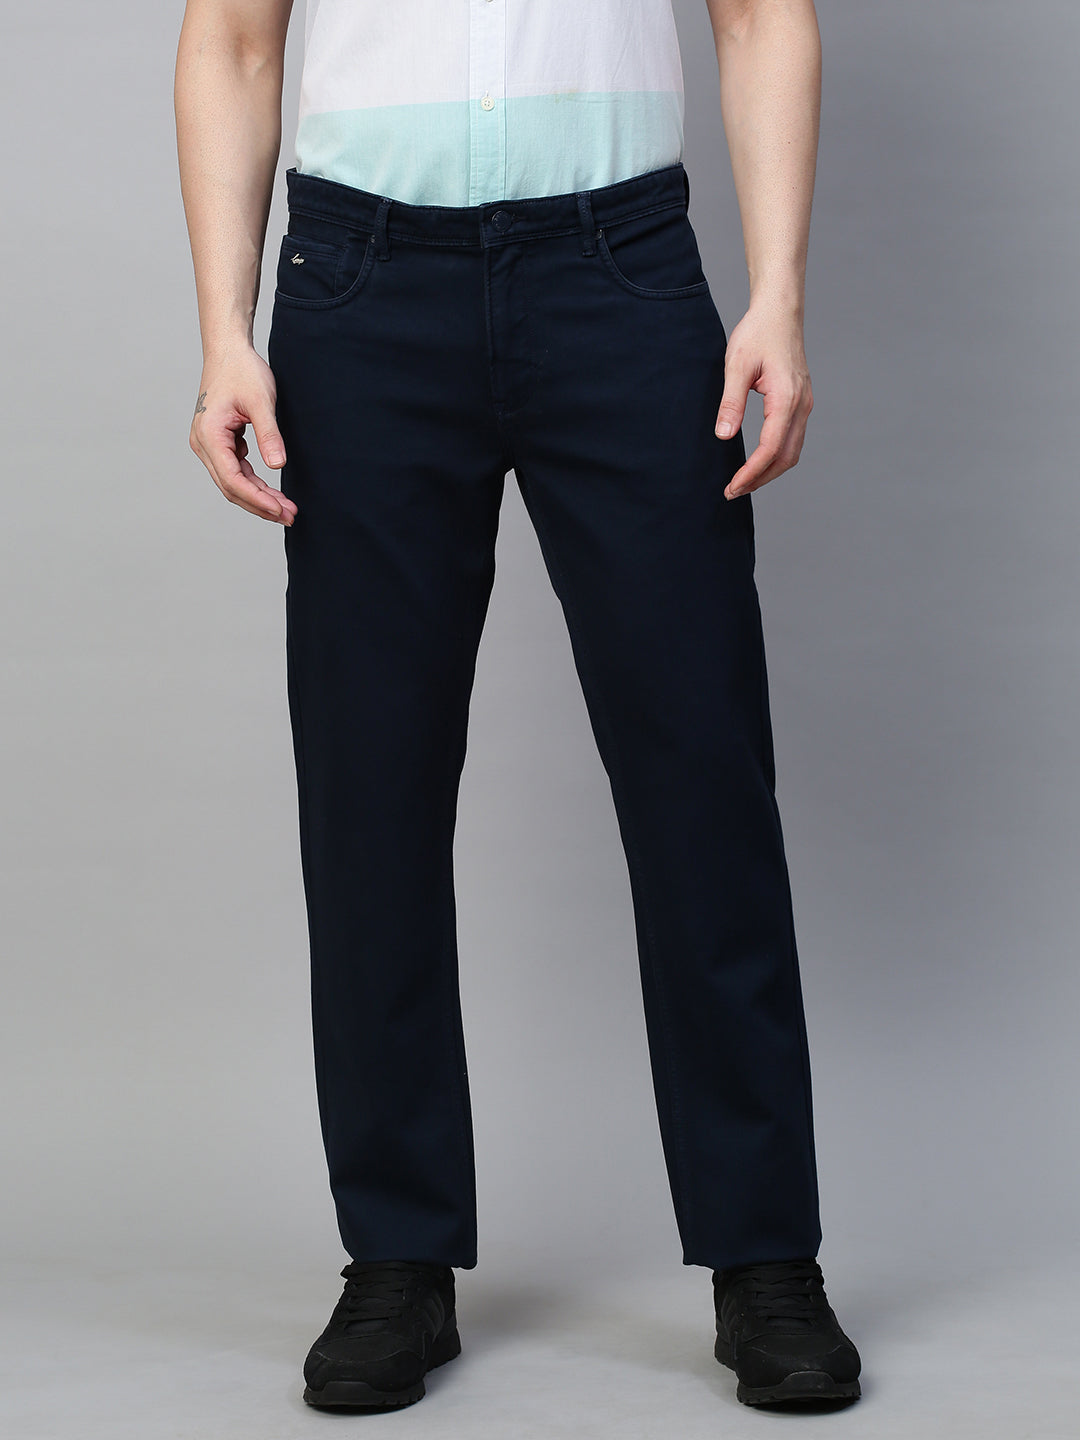 Genips Men's Navy Cotton Stretch Rico Slim Fit Solid Casual Chinos